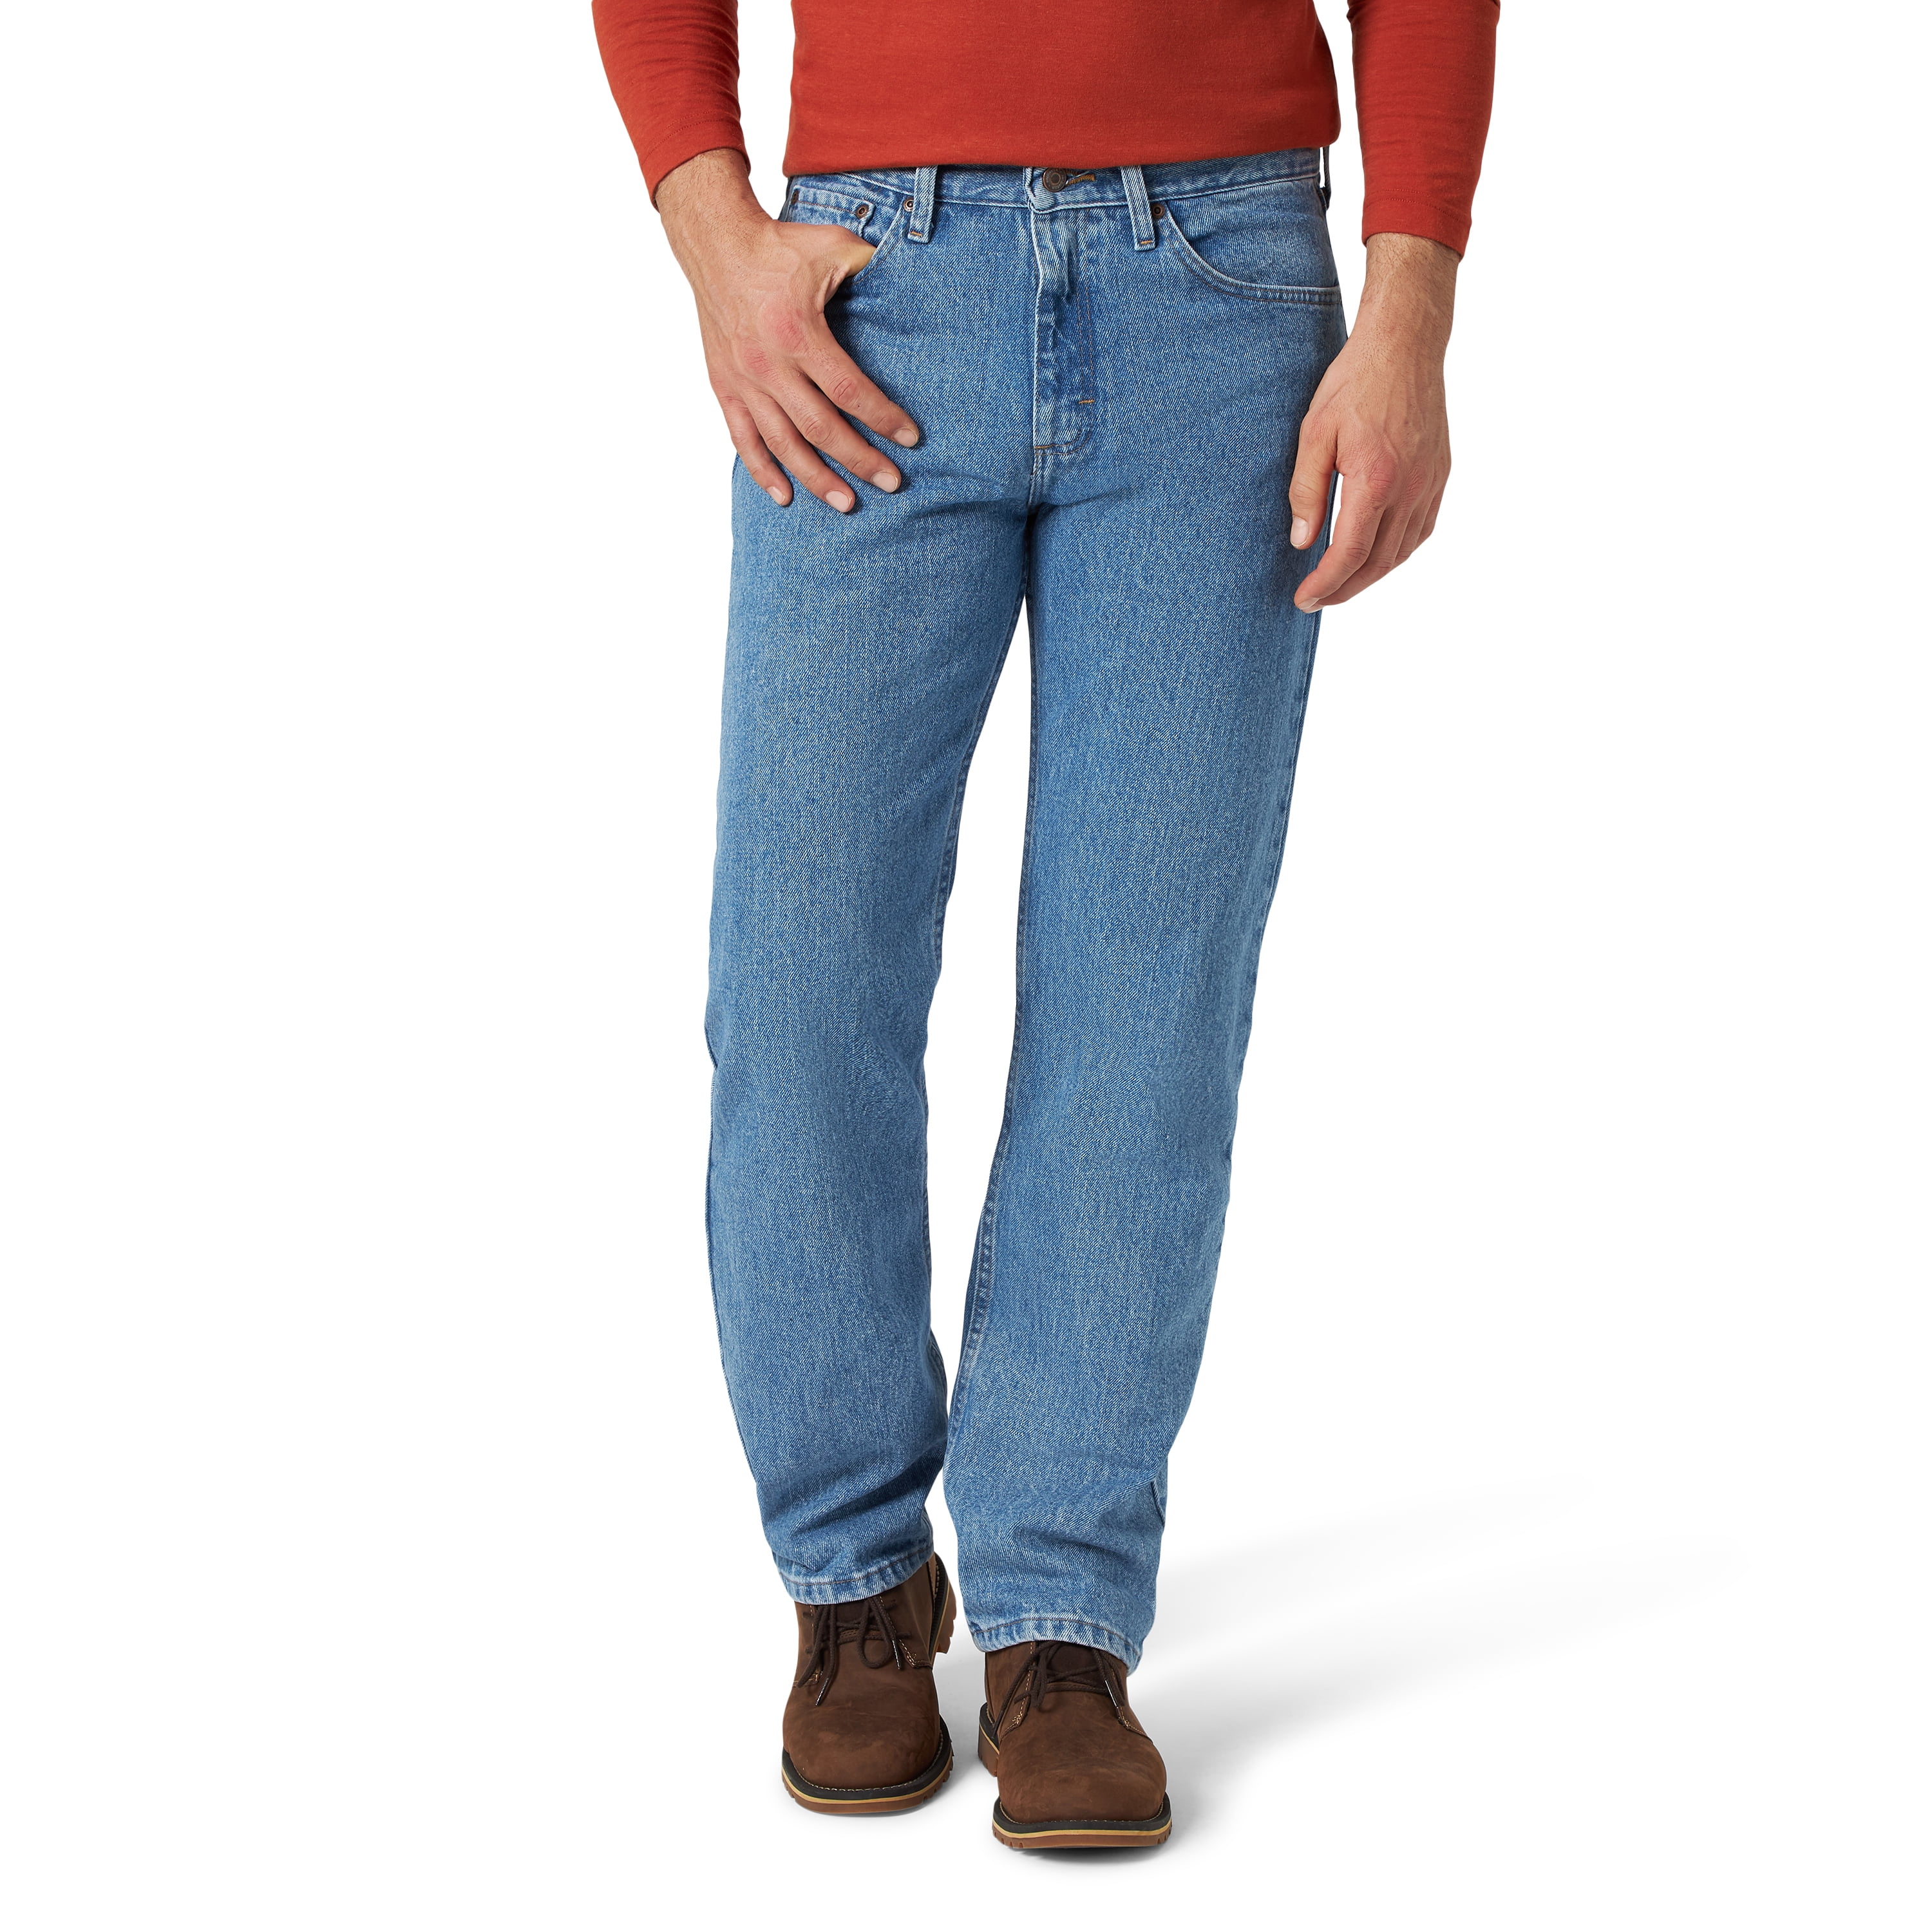 New Wrangler Relaxed Fit Jeans Big and Tall Sizes Four Colors Available 